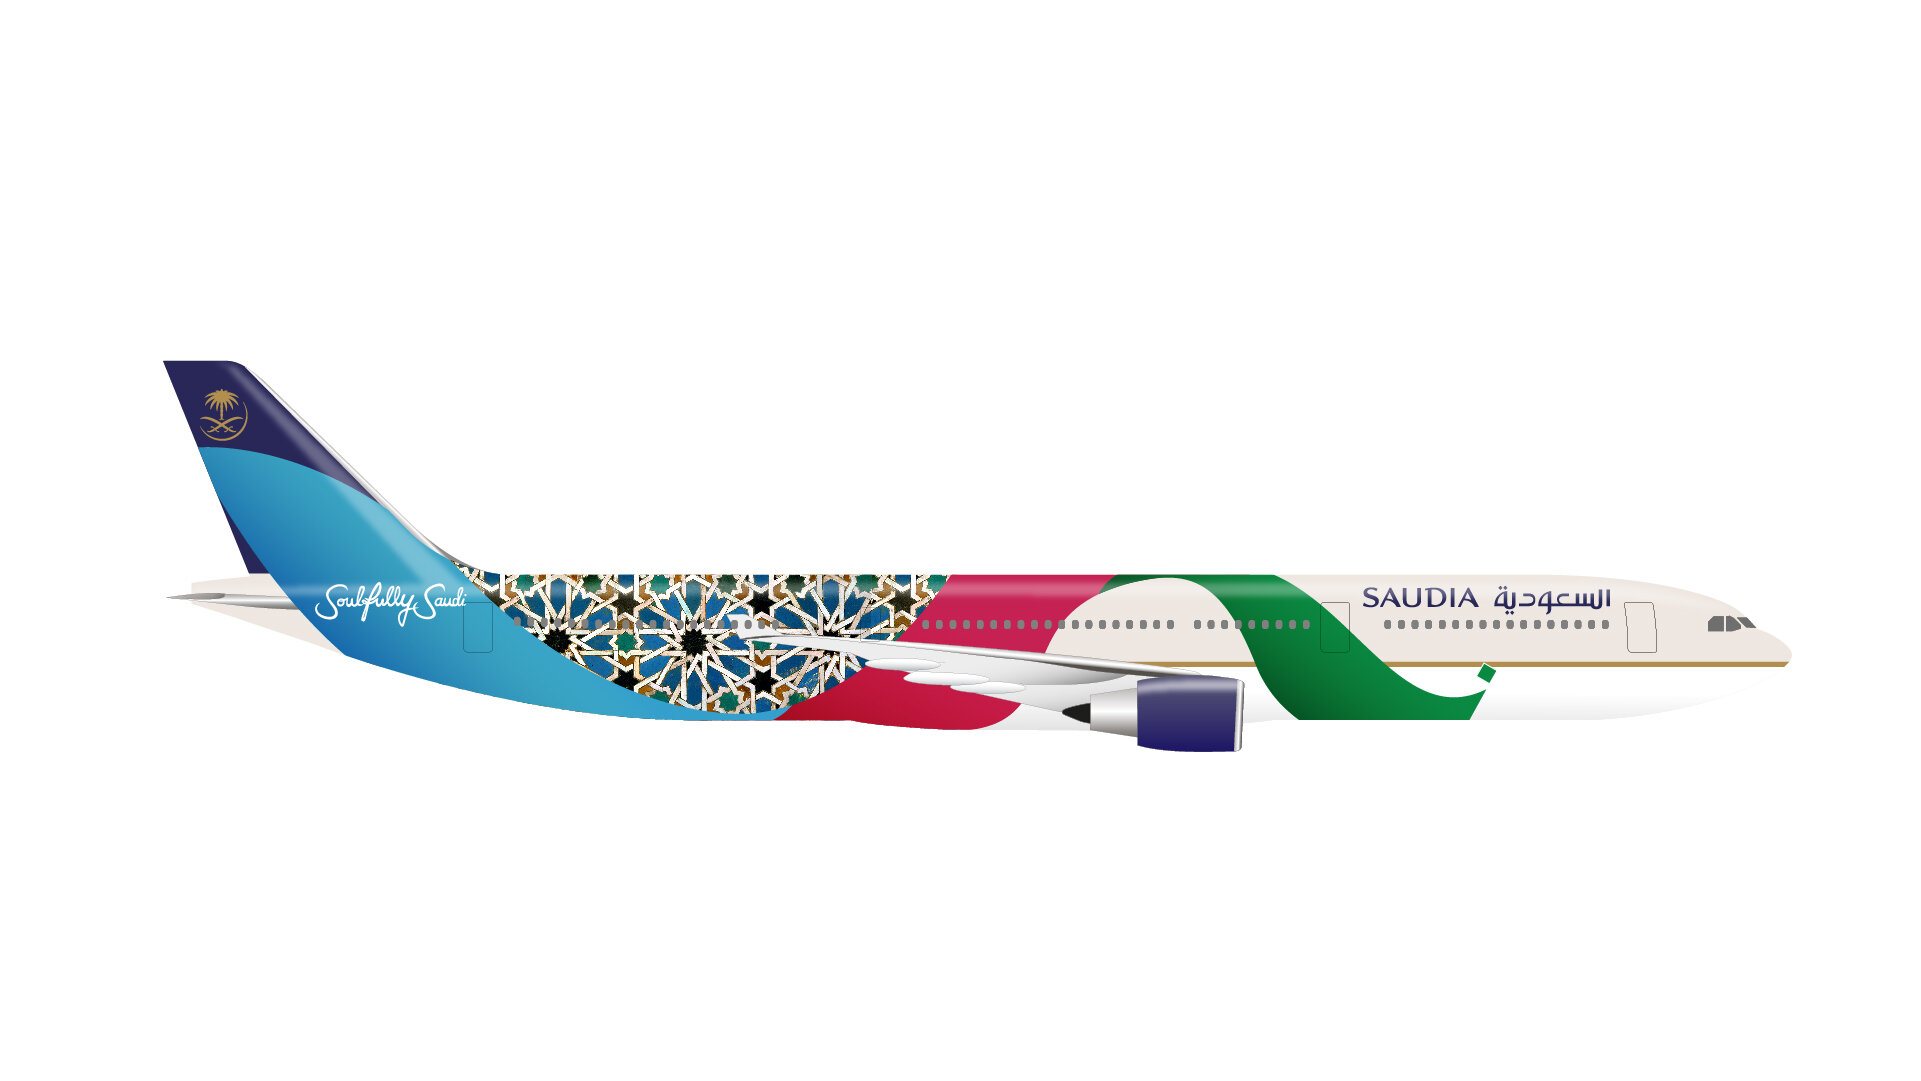 SAUDIA_Route 1_Exploration_Livery - 4_Plane RIGHT SIDE 3.jpg